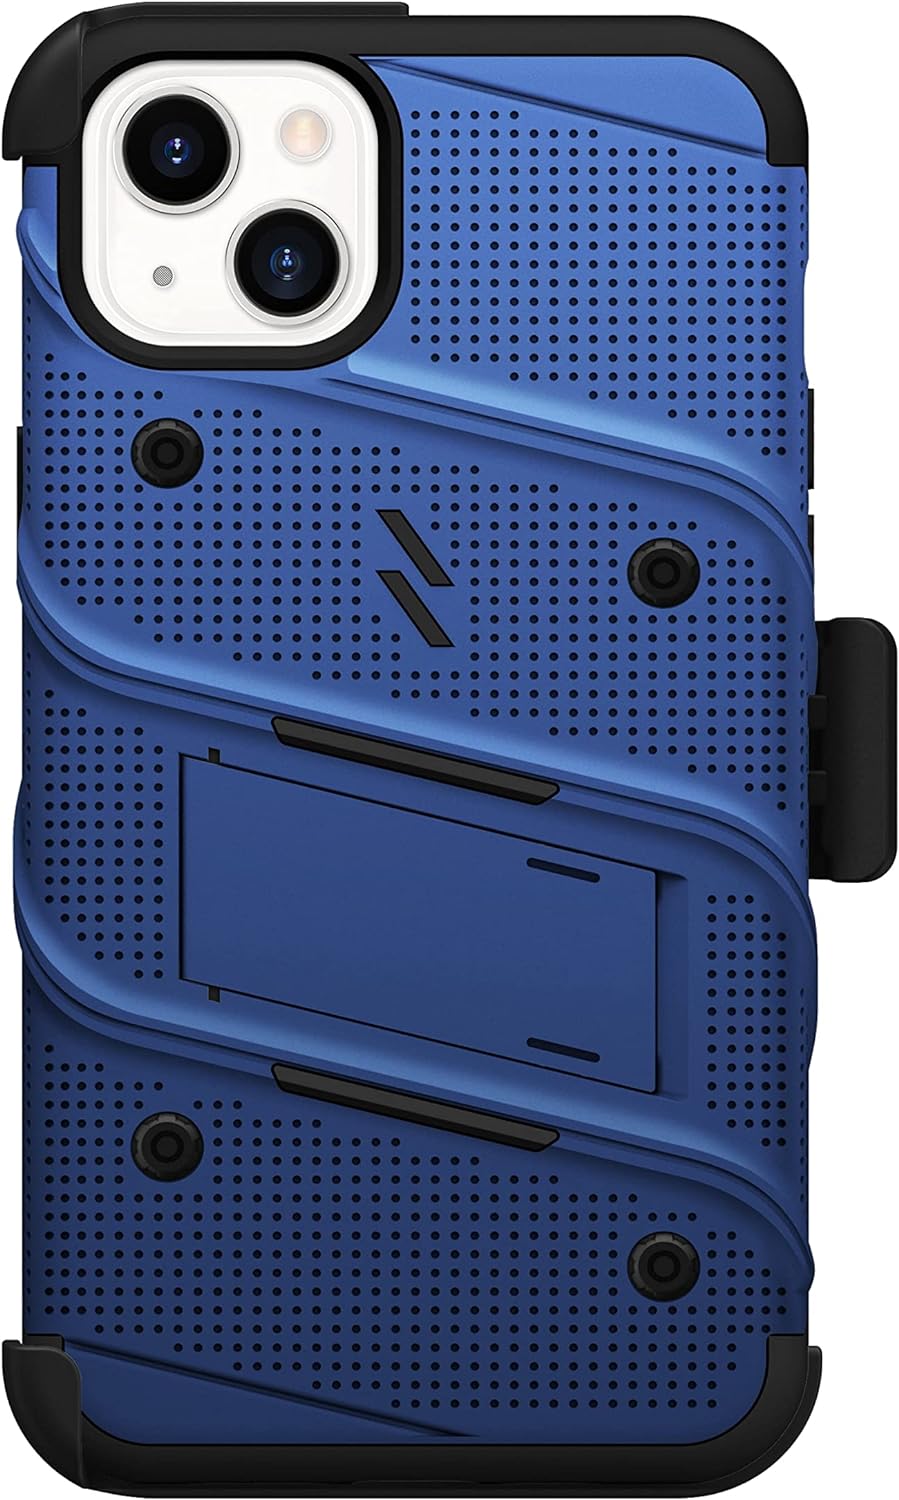 Zizo Bolt Apple iPhone 15 Plus Holster Case with Tempered Glass, Kickstand & Lanyard - Blue